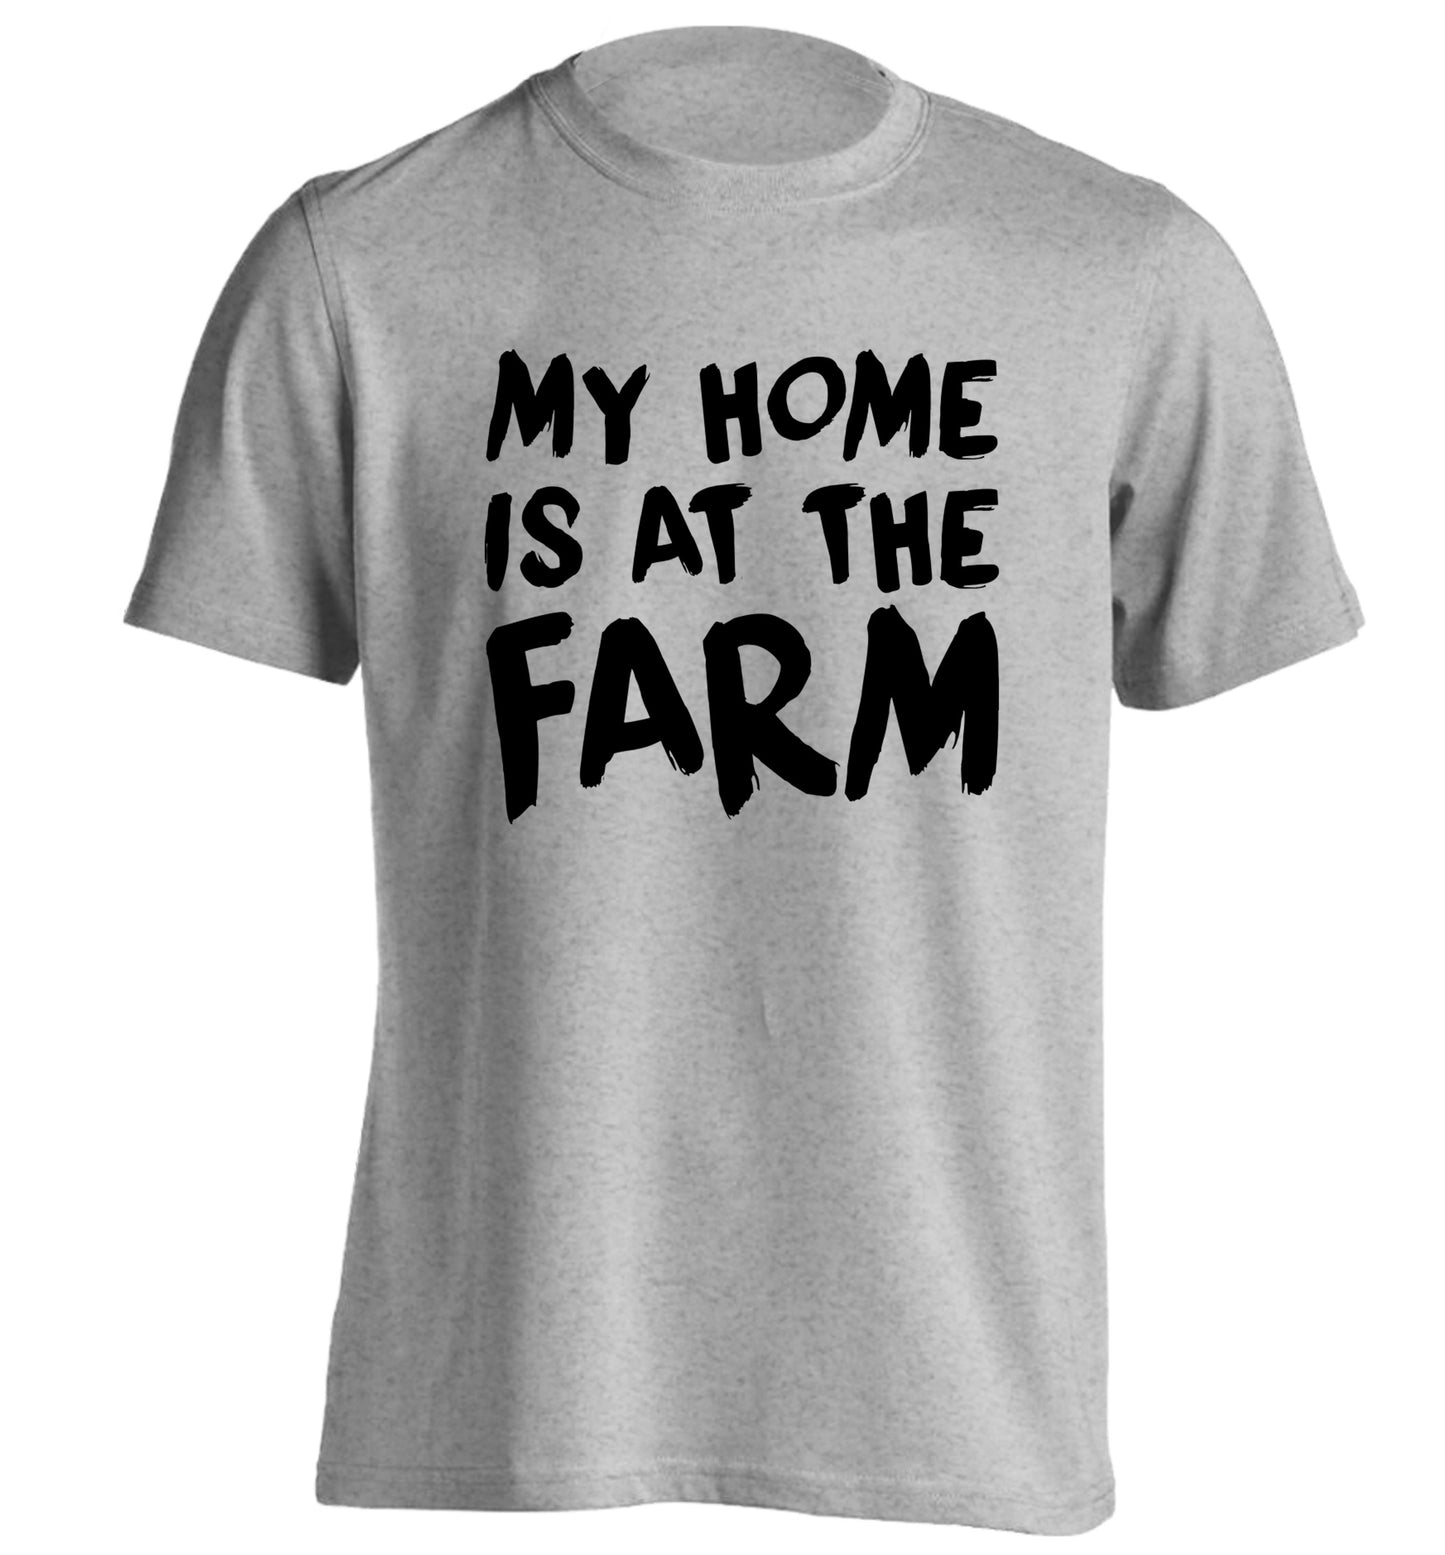 My home is at the farm adults unisex grey Tshirt 2XL